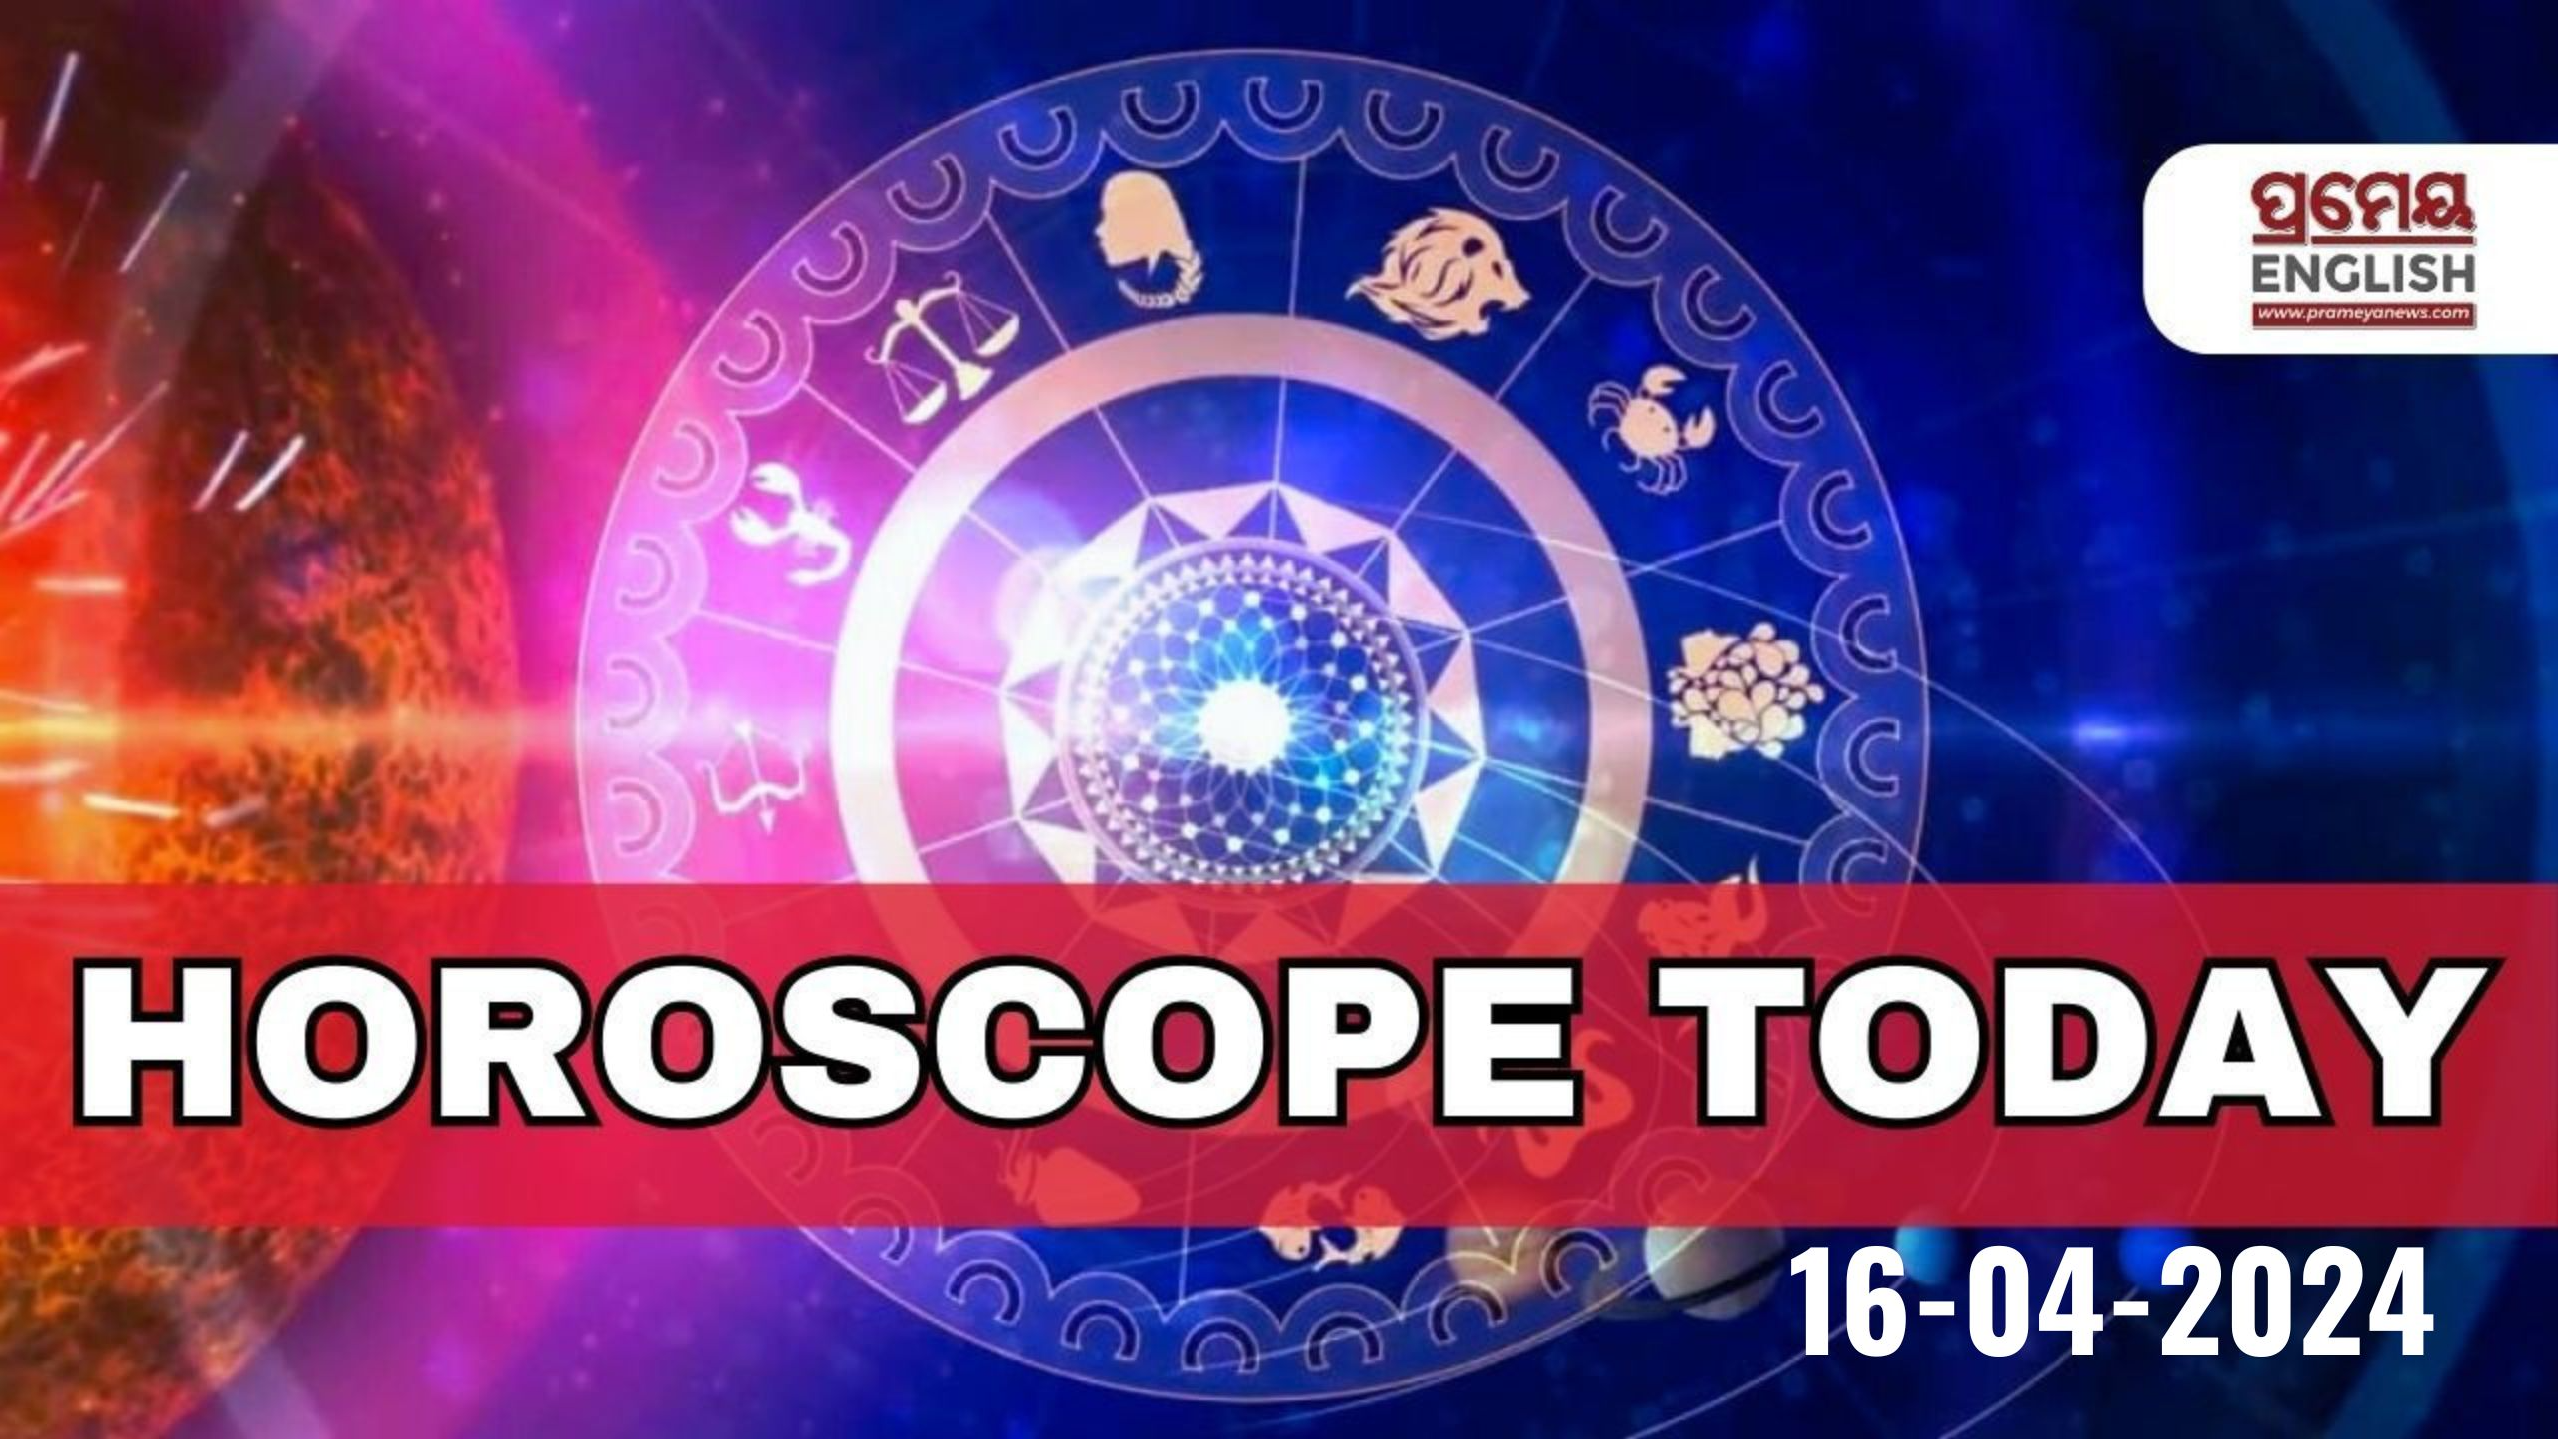 Horoscope Today: Astrological prediction for April 23, 2024